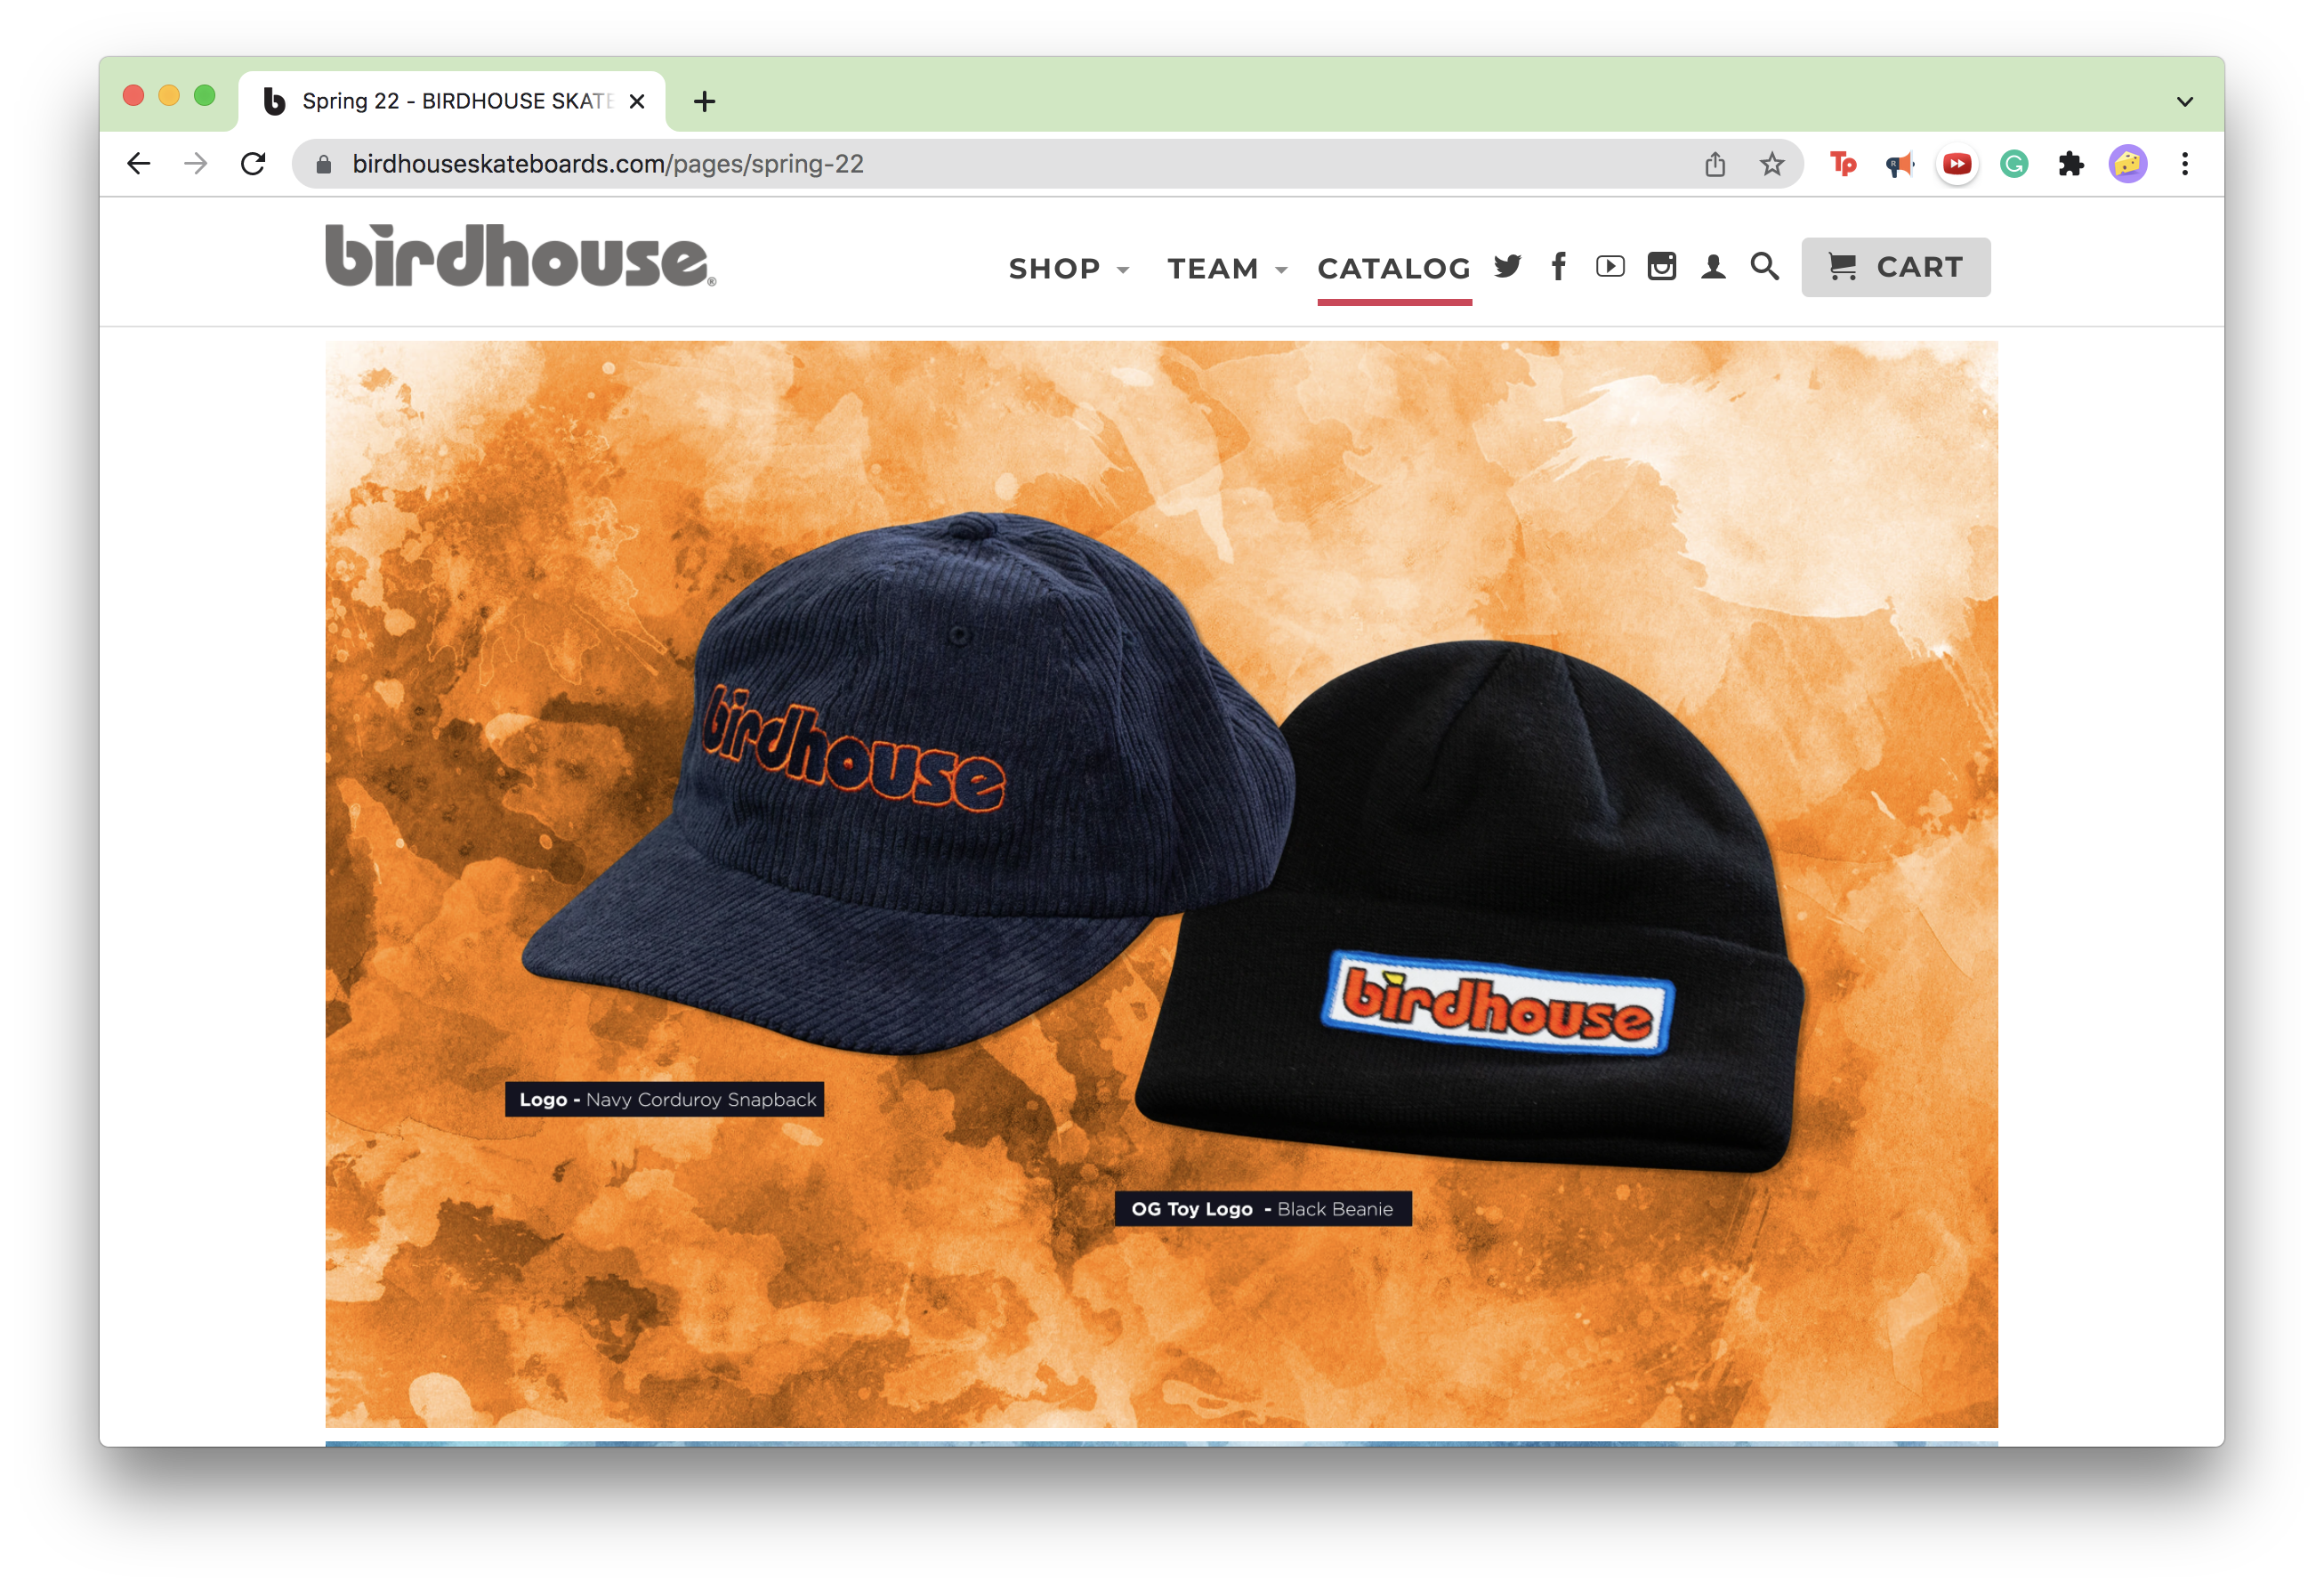 Screenshot of the catalog page of the Birdhouse website.